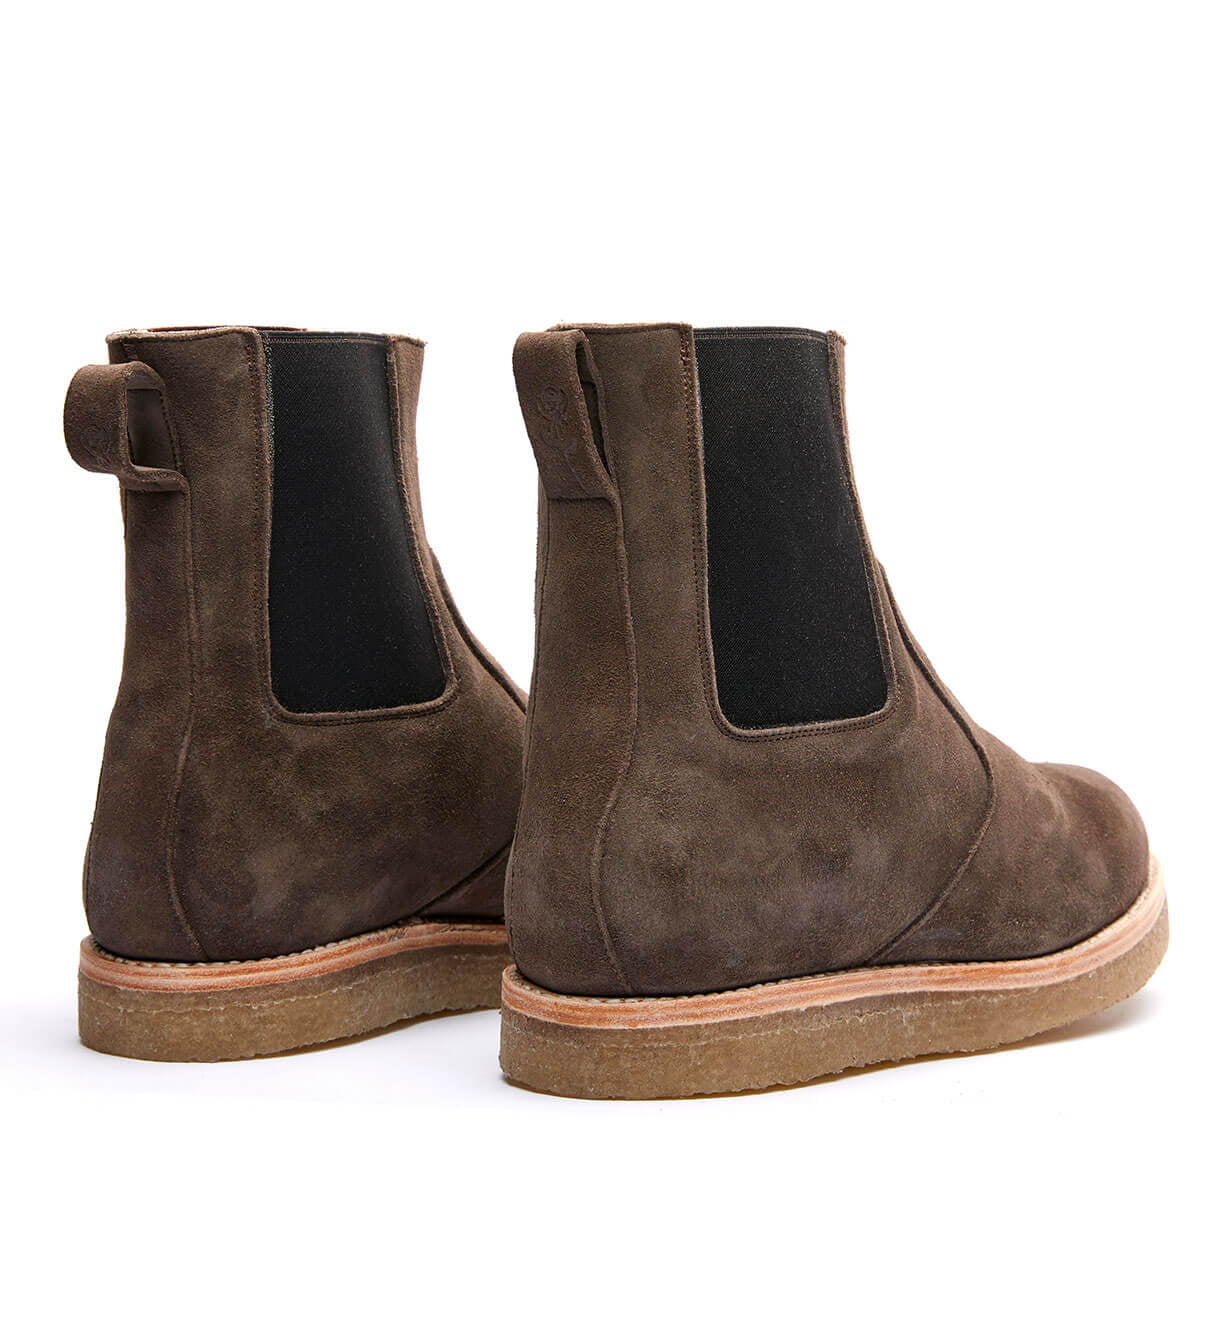 Pair of Santa Rosa Brand Stamford Boot brown suede Chelsea boots with a natural crepe outsole on a white background.